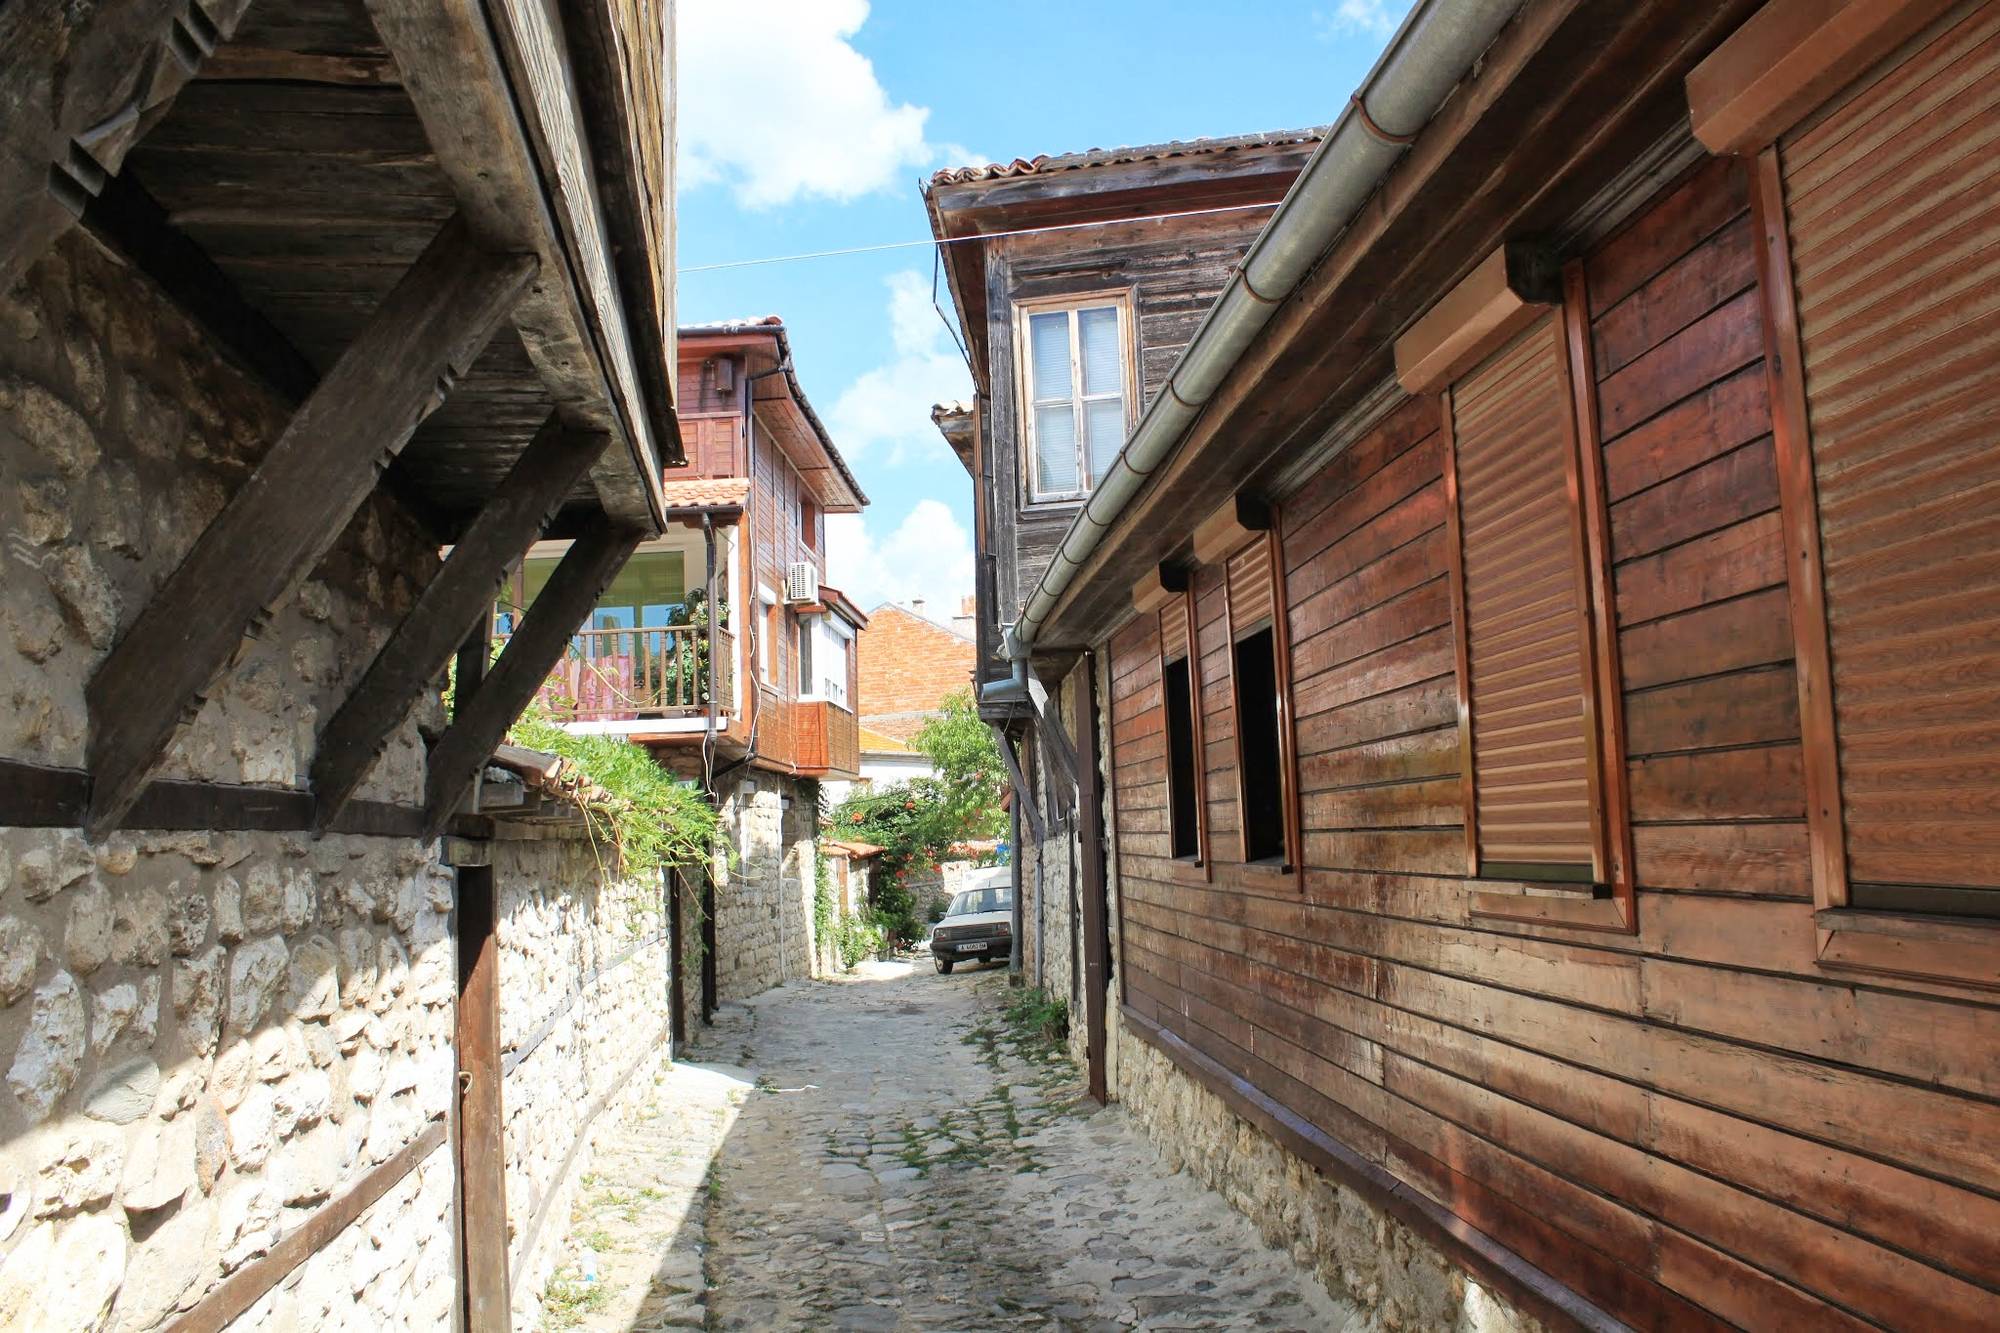 There are very narrow streets in Nessebar